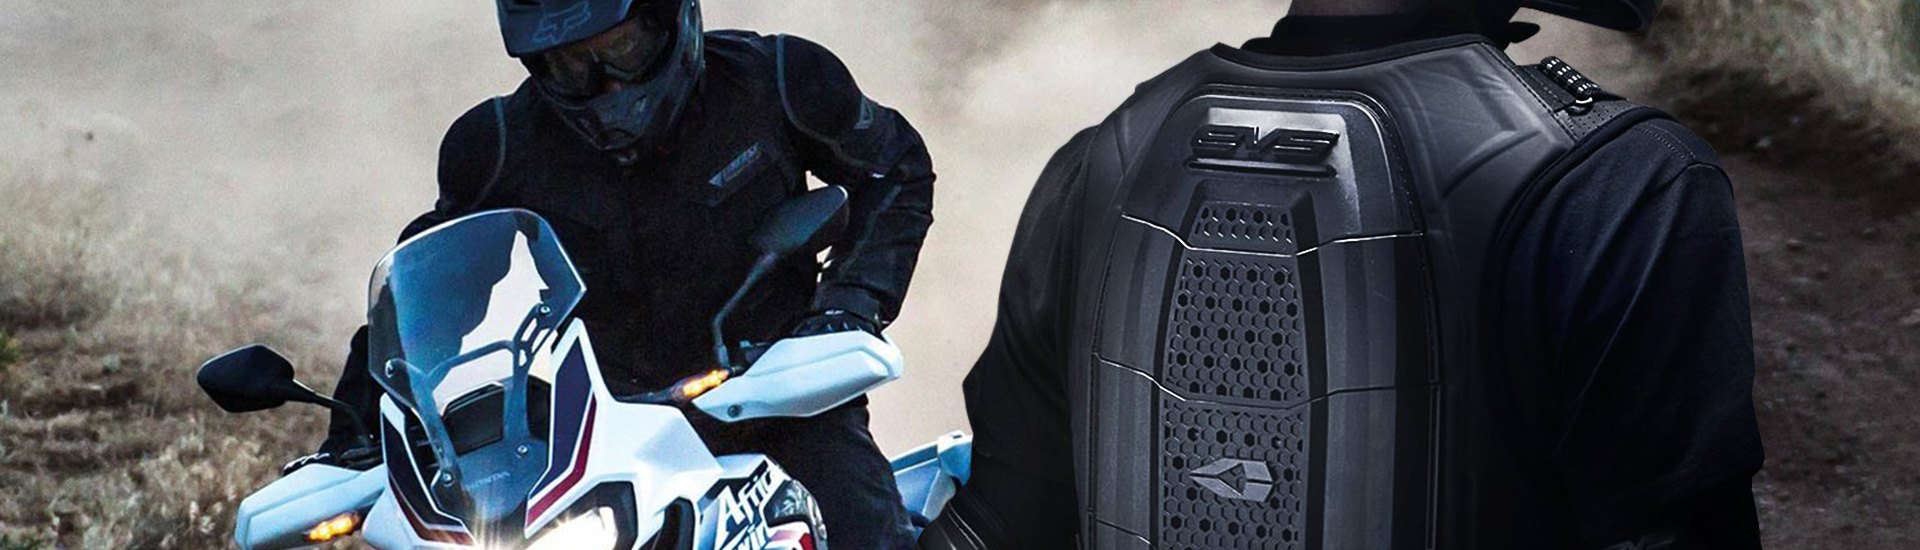 Motorcycle Body Armor & Protection